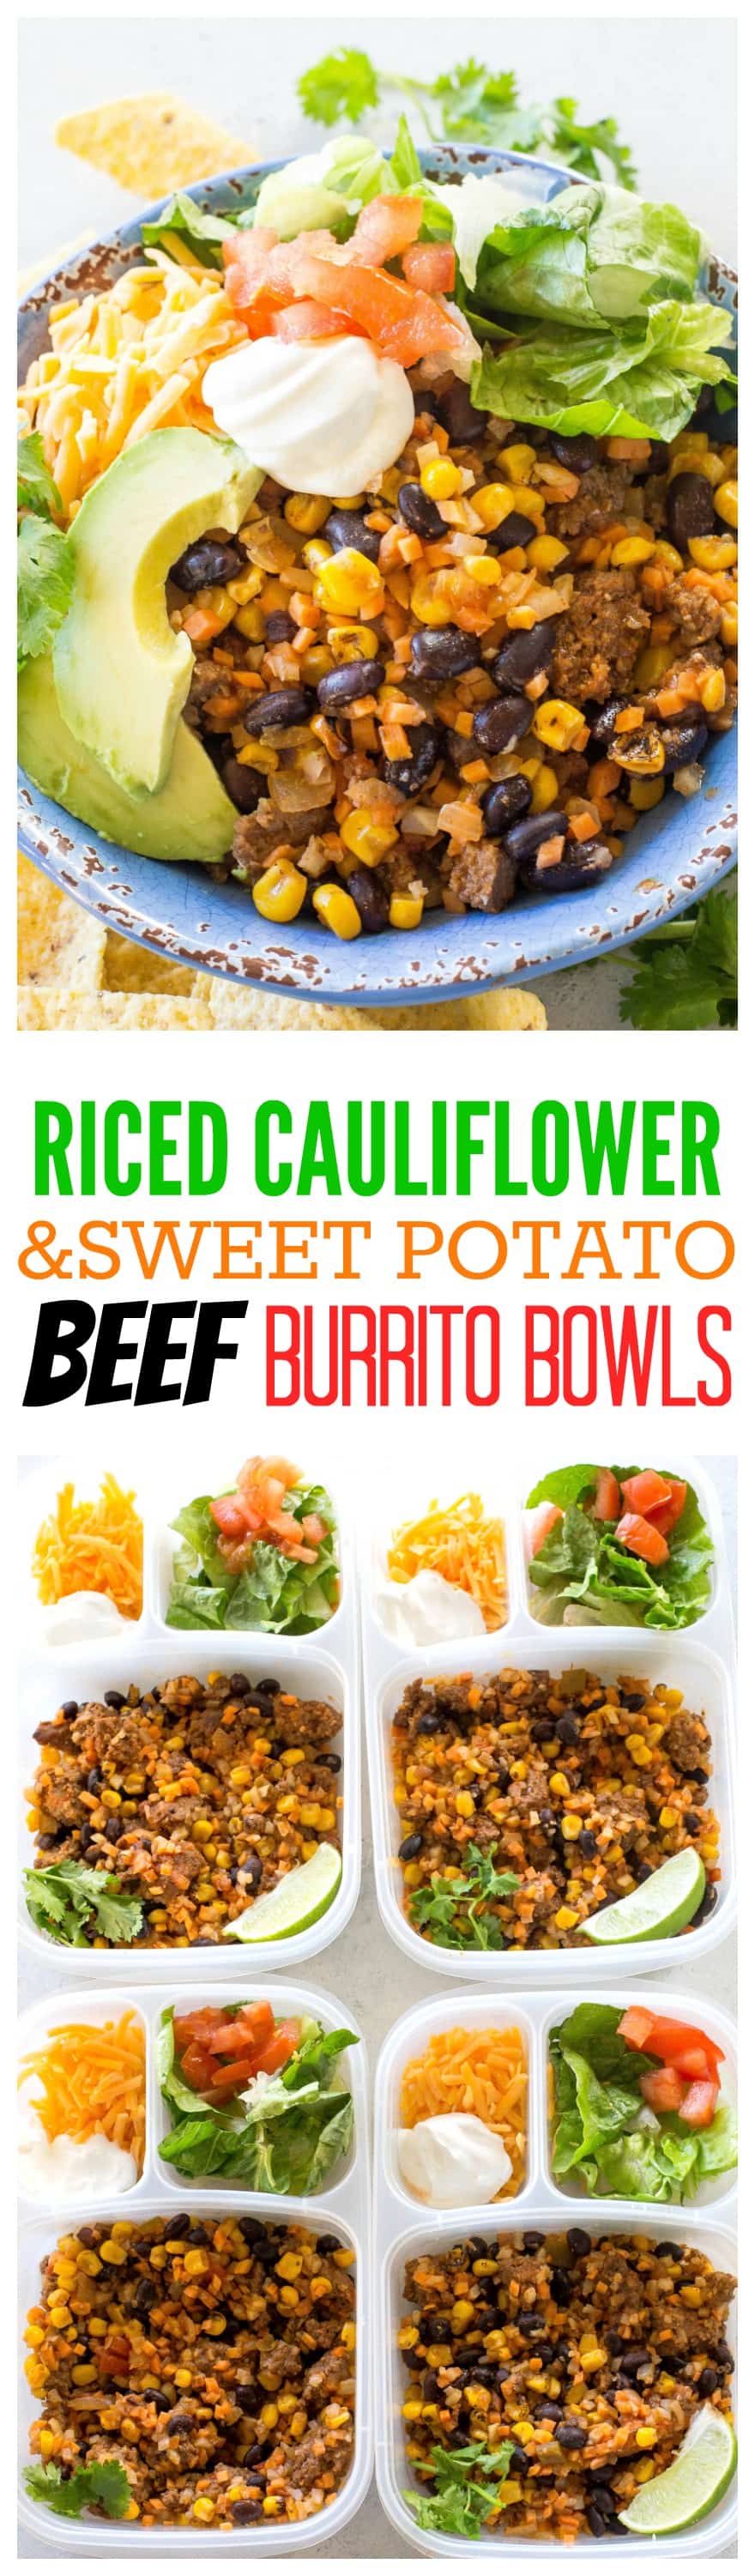 Riced Cauliflower and Sweet Potato Beef Burrito Bowls - a healthy version of your favorite burrito bowl made with Green Giant veggies! #ad the-girl-who-ate-everything.com